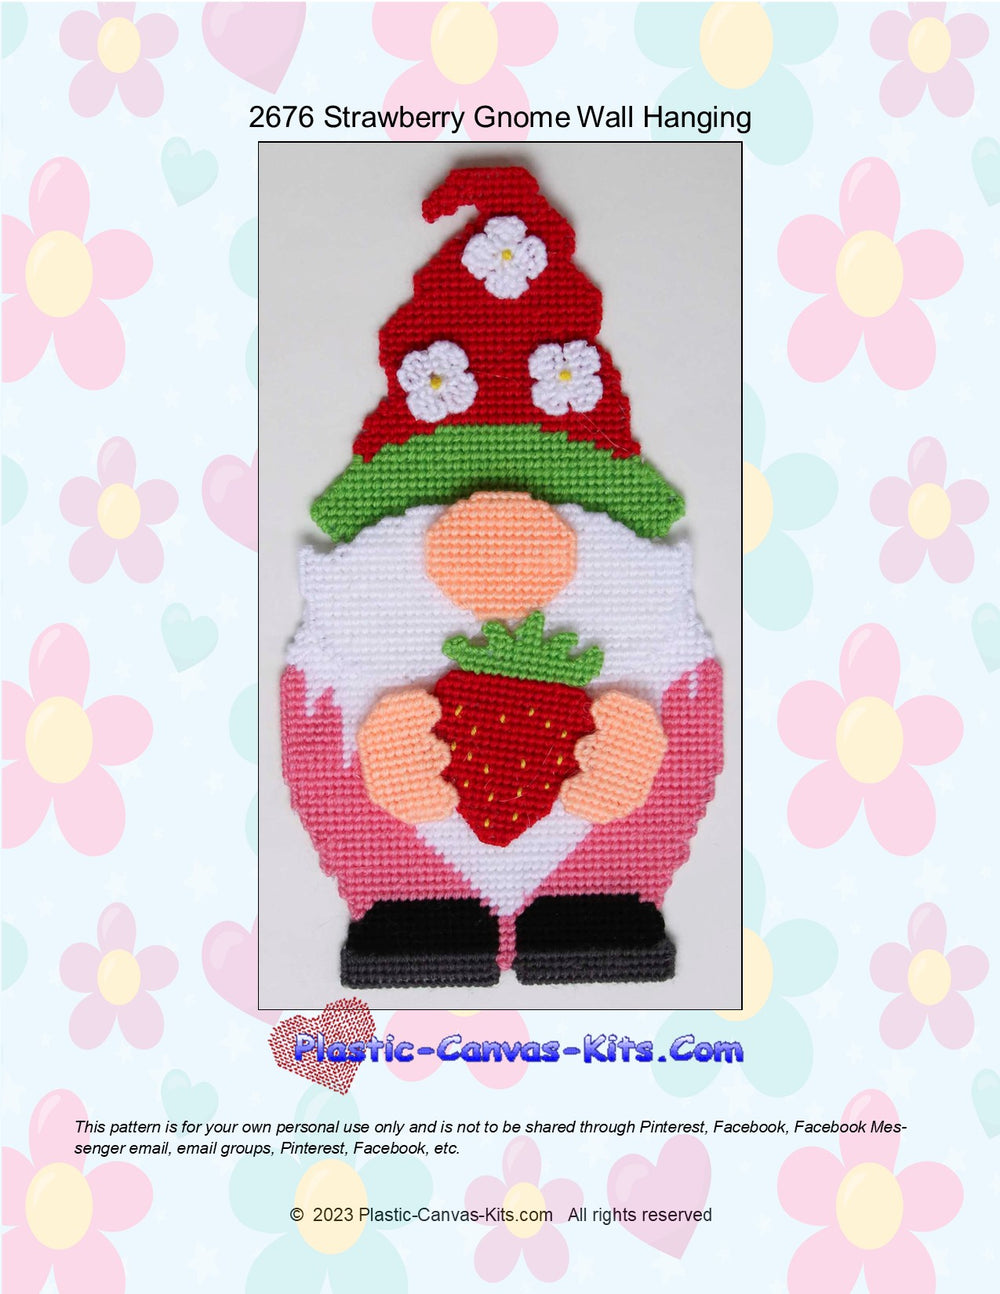 Strawberry Gnome Wall Hanging